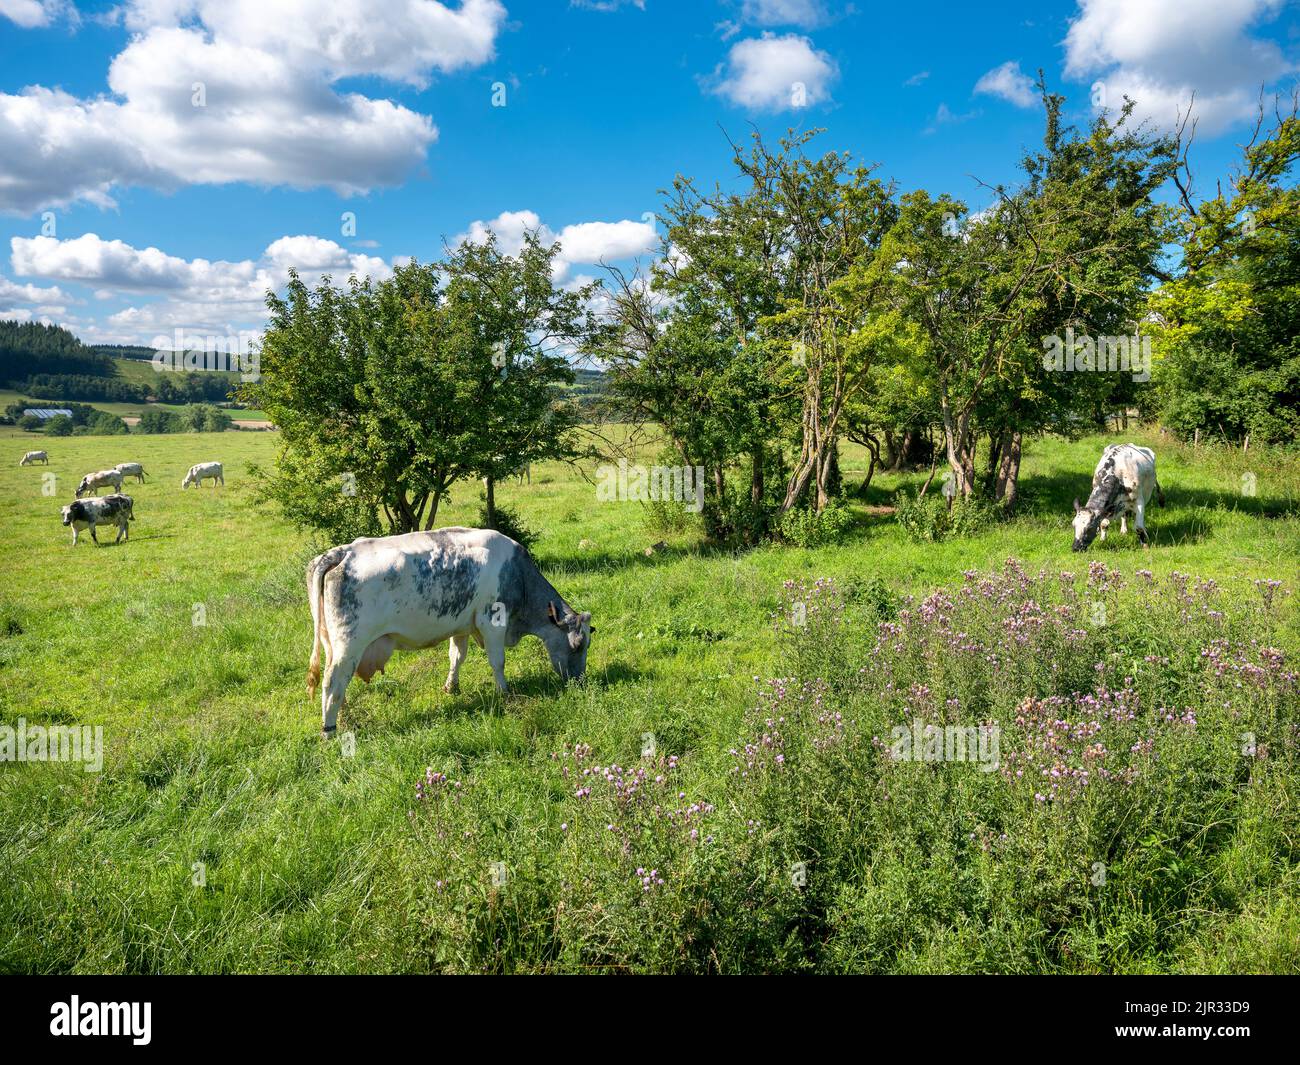 cows graze near thistles in green grassy summer landscape near Han sur Lesse and Rochefort in belgian ardennes area Stock Photo